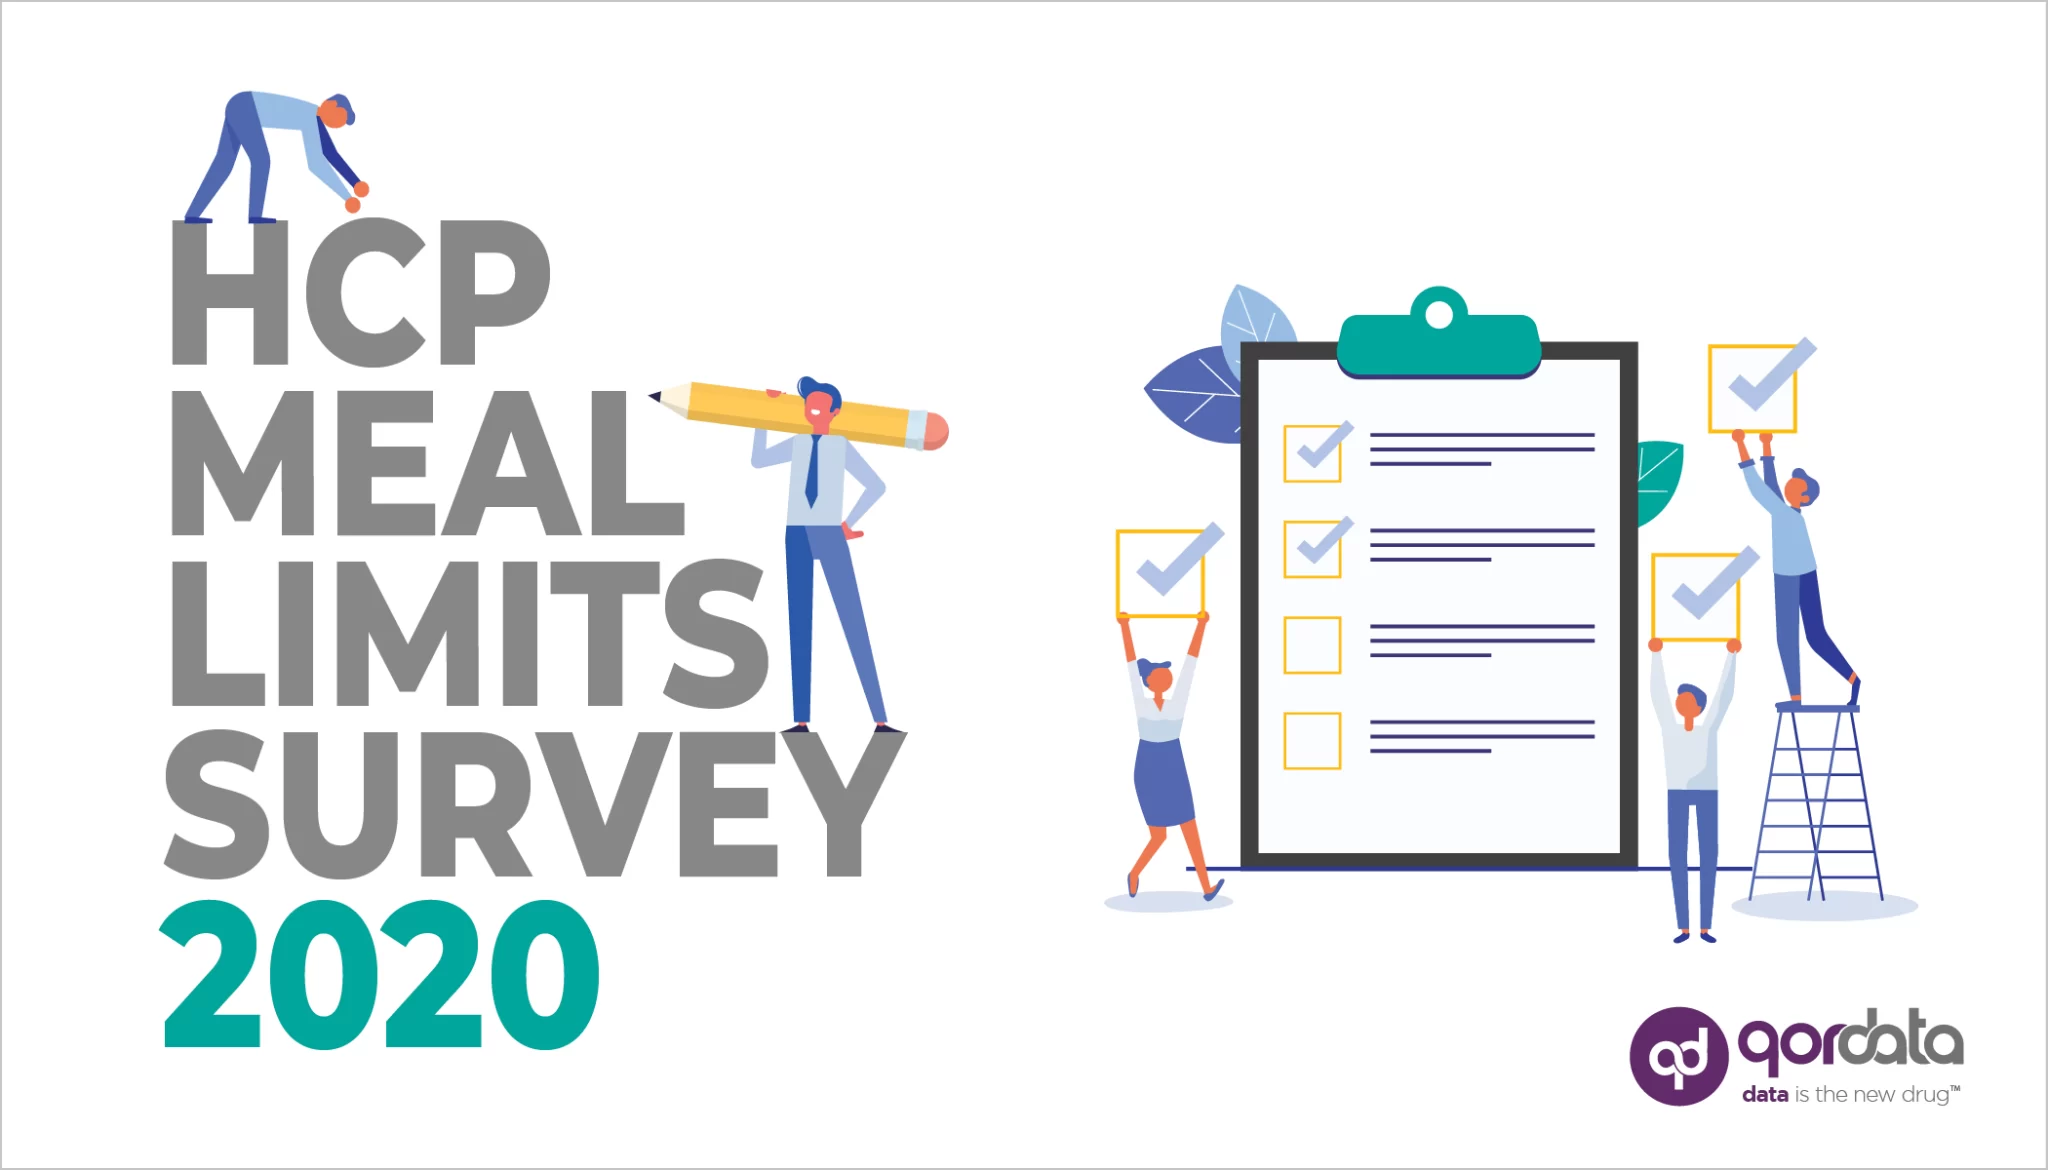 HCP Meal Limit Survey Insights